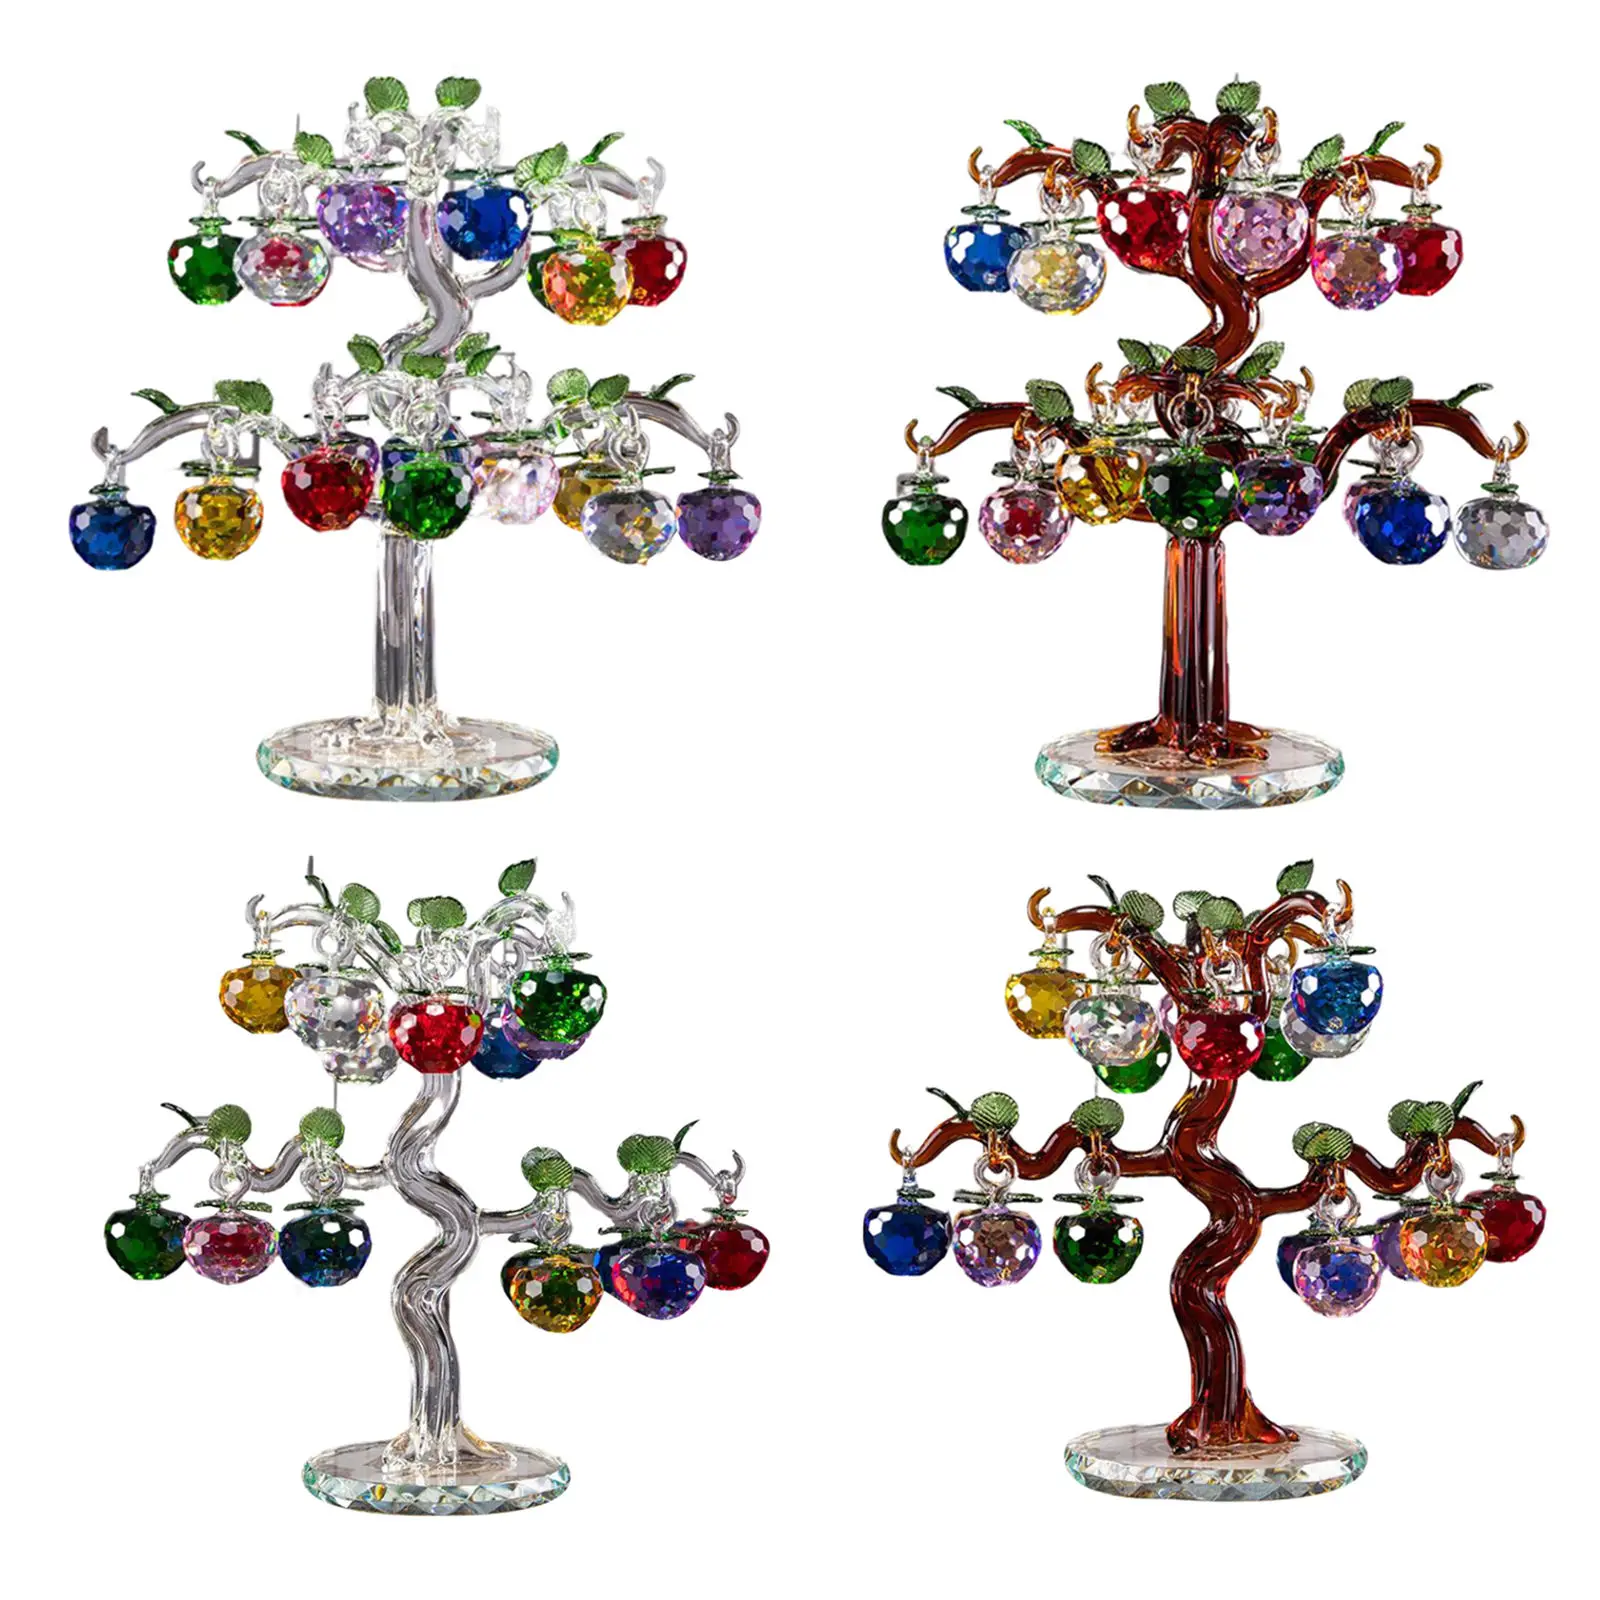 Crystal  Tree Glass Craft Good Luck Decorative Artificial Colorful Figurines for Bedroom Gifts Birthday Festival Bar